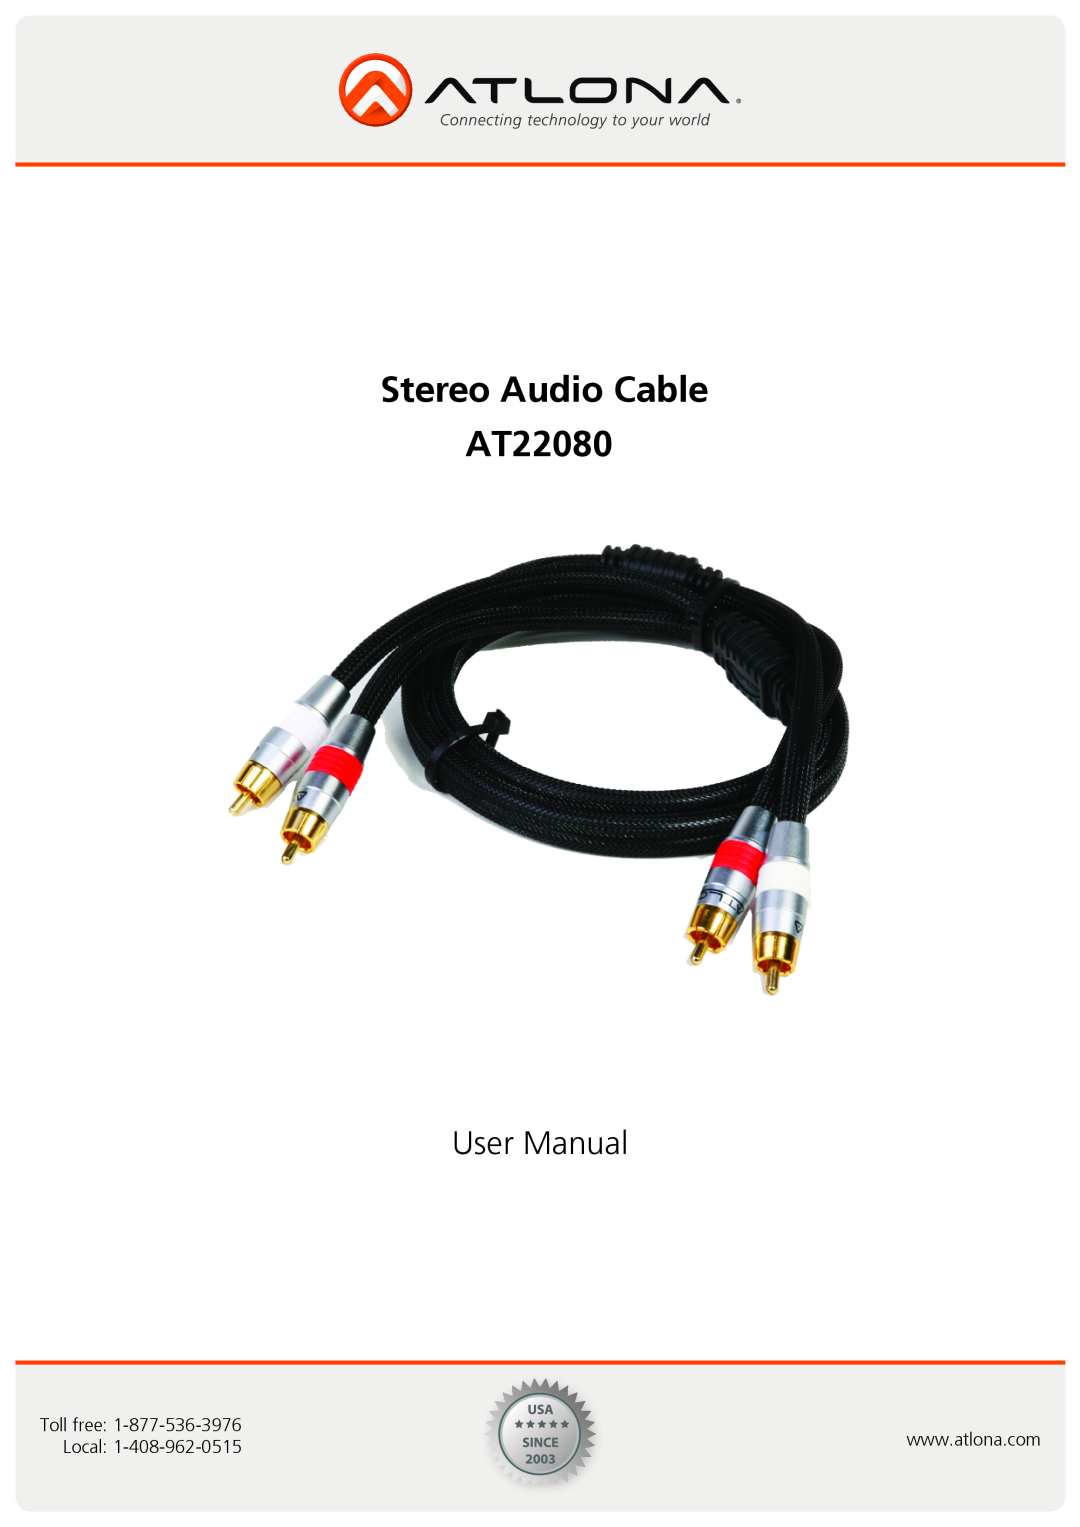 Atlona user manual Stereo Audio Cable AT22080, Toll free, Local 